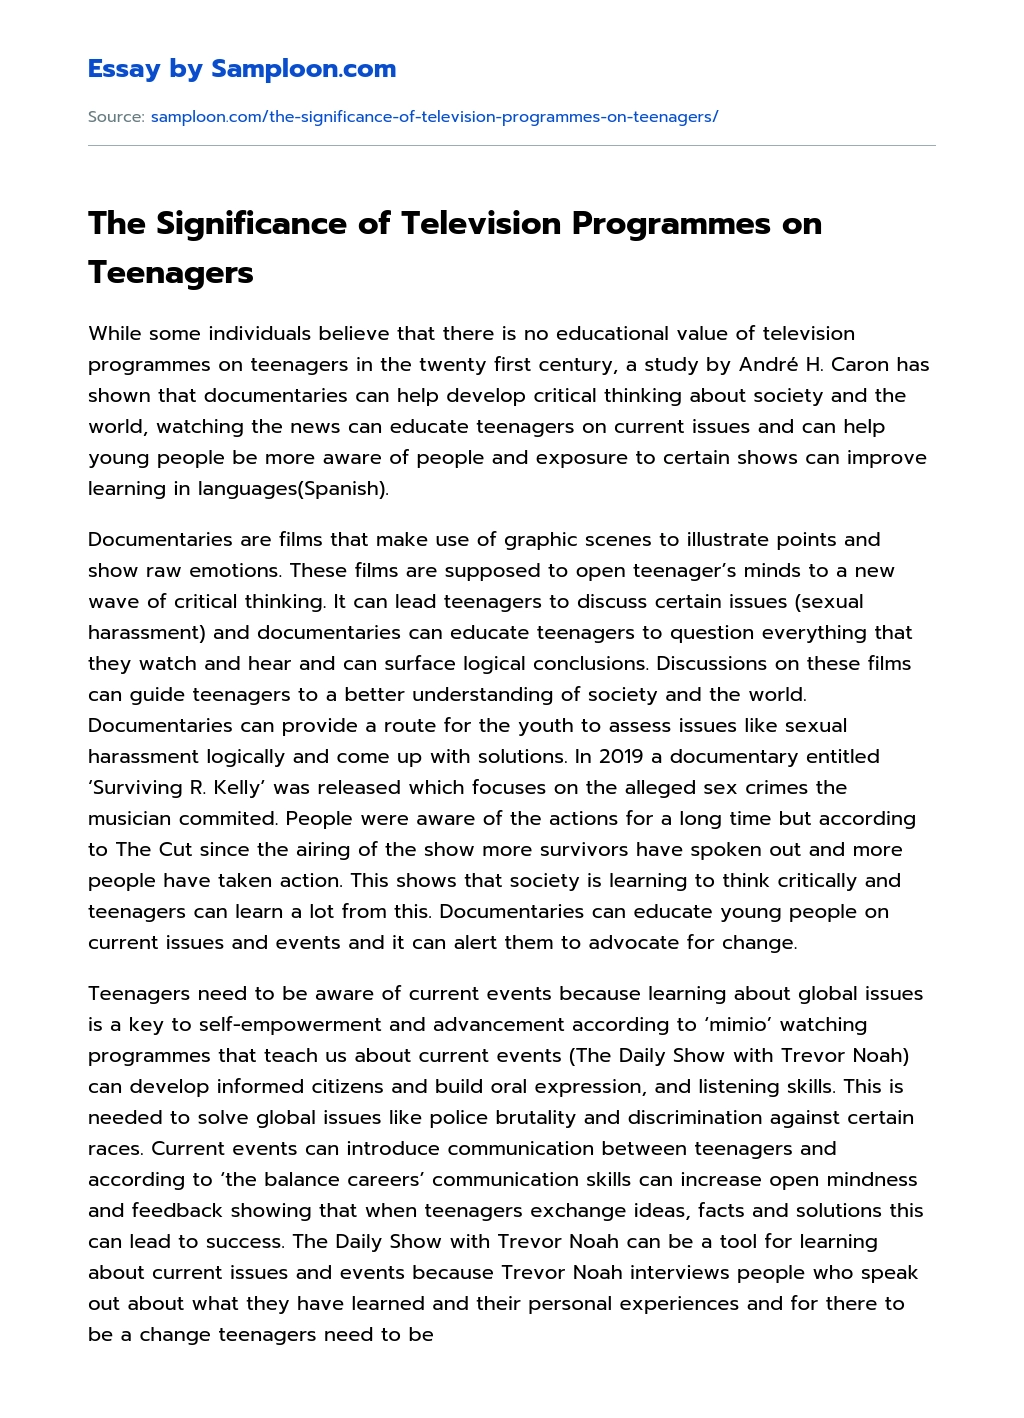 The Significance of Television Programmes on Teenagers essay